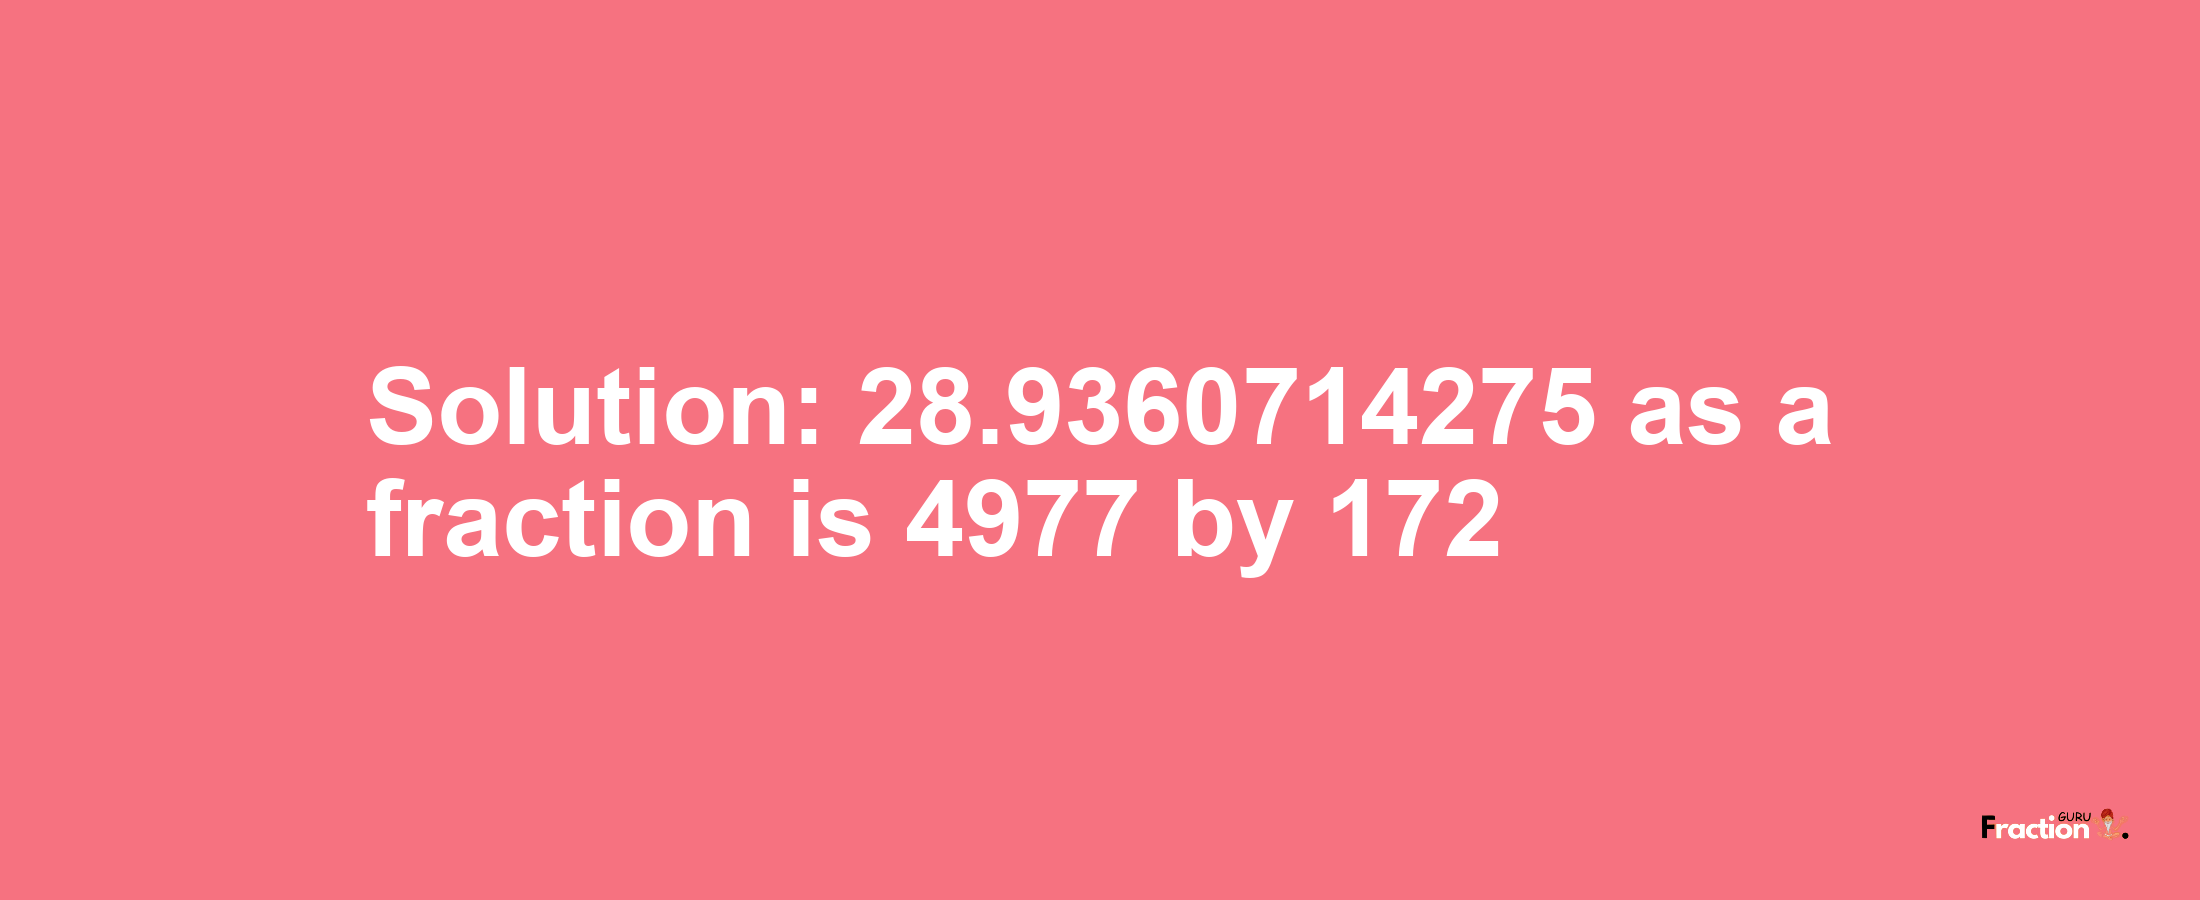 Solution:28.9360714275 as a fraction is 4977/172